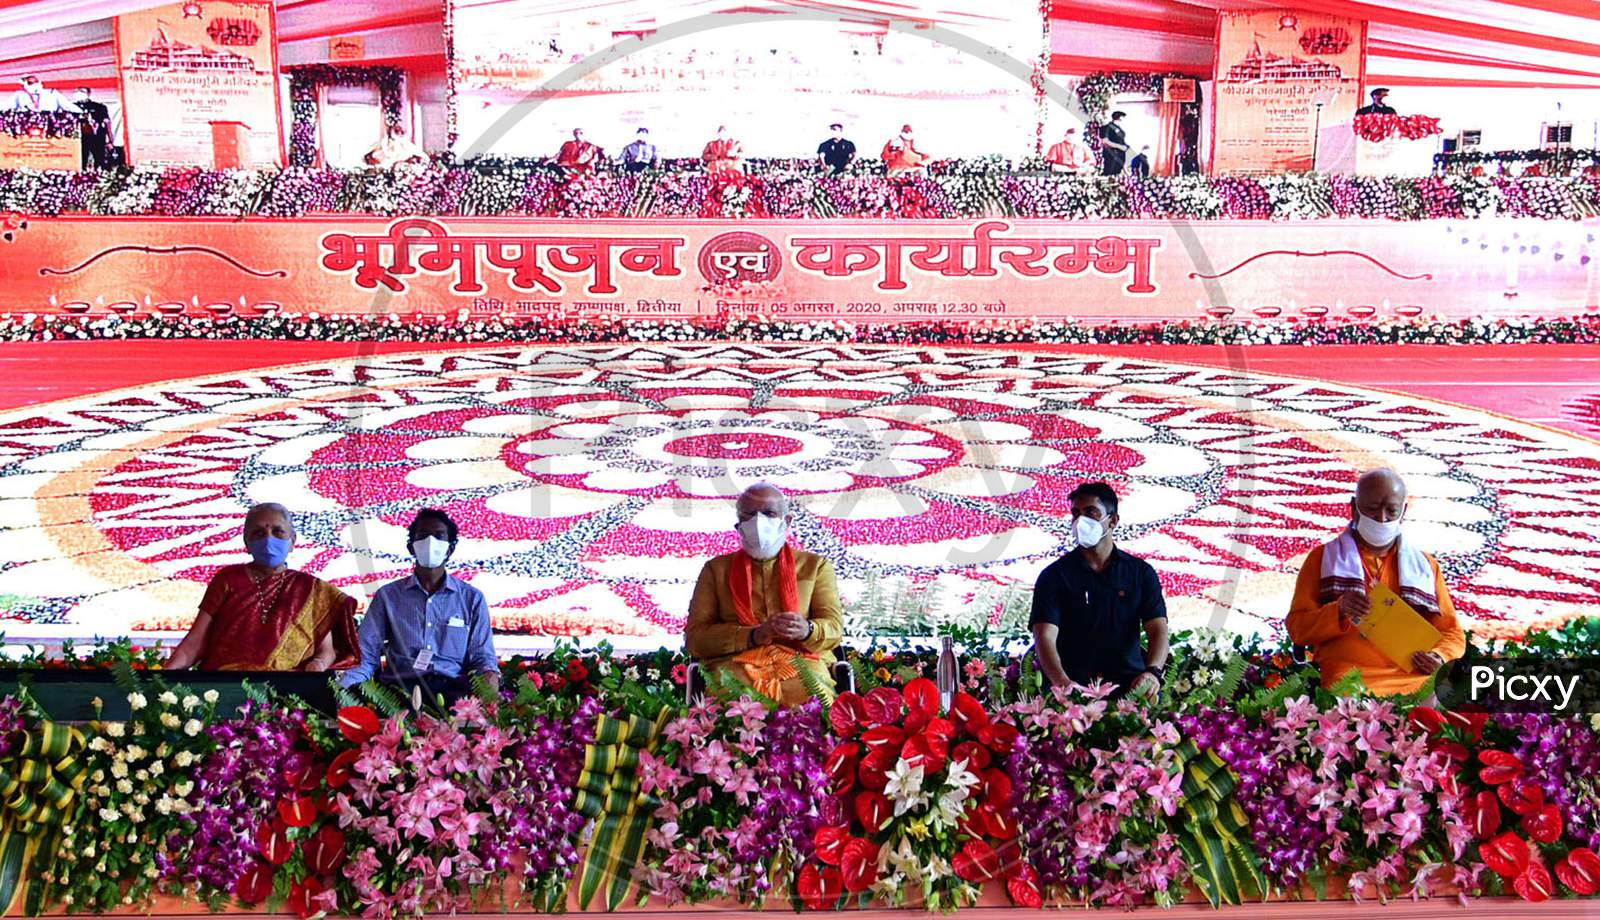 Prime Minister Narendra Modi, Uttar Pradesh Governor Anandiben Patel and Rashtriya Swayamsevak Sangh (RSS) chief Mohan Bhagwat, address people after the foundation laying ceremony for the Hindu Lord Ram's temple, in Ayodhya, India, August 5, 2020.